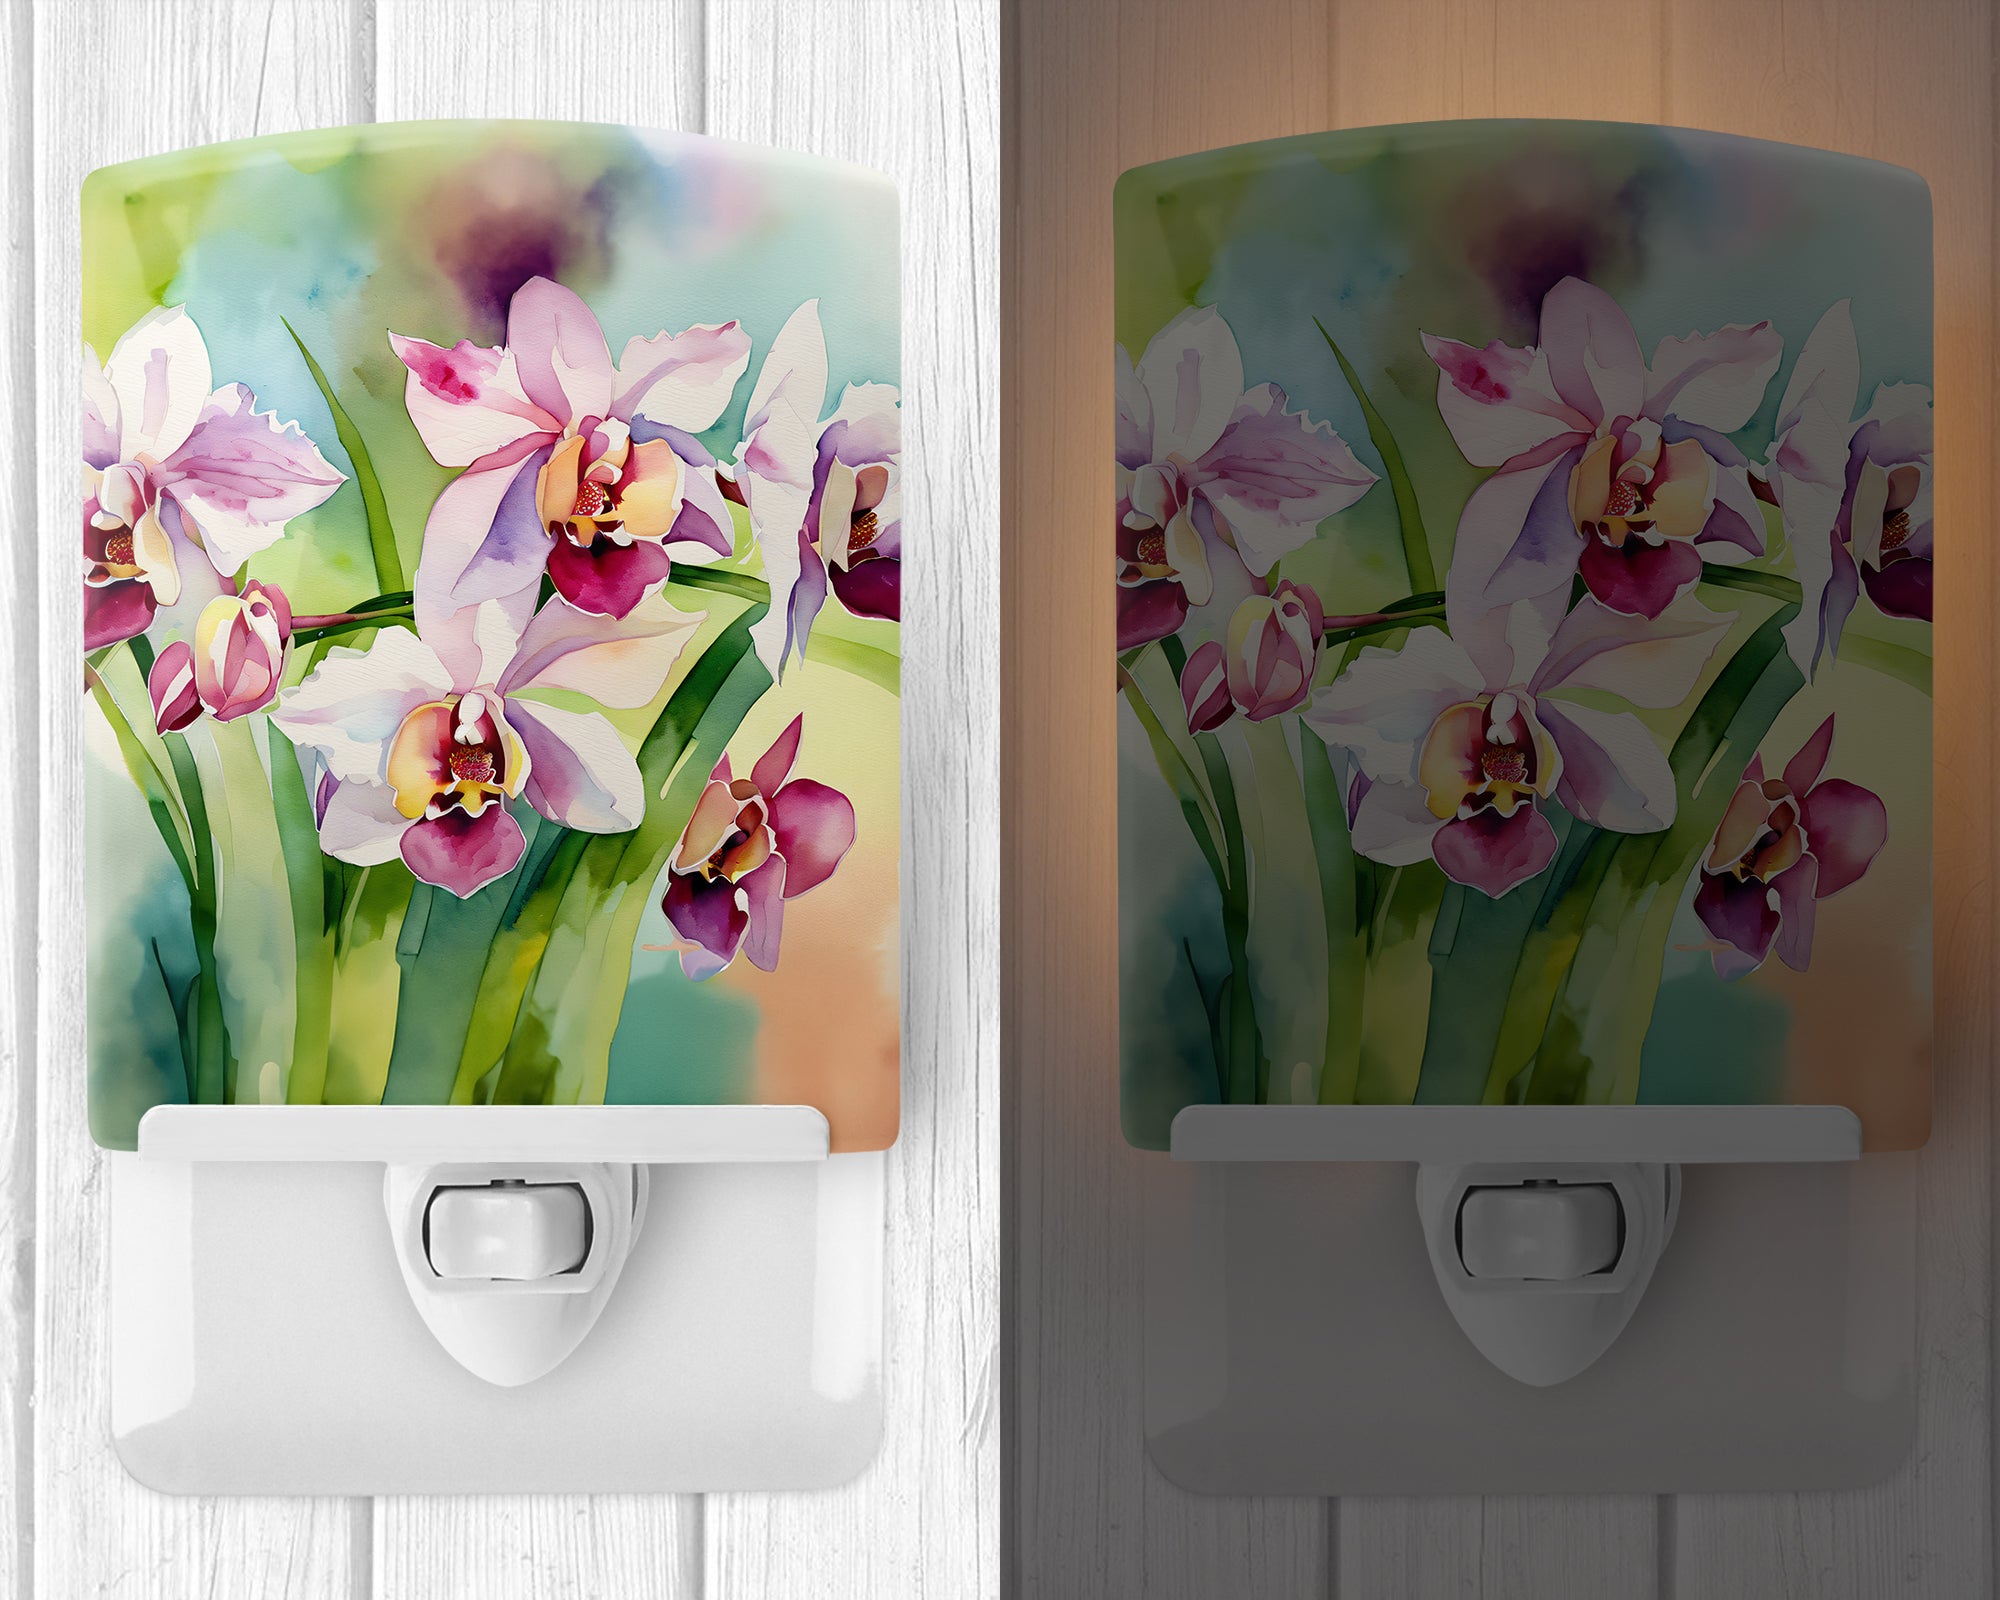 Buy this Orchids in Watercolor Ceramic Night Light